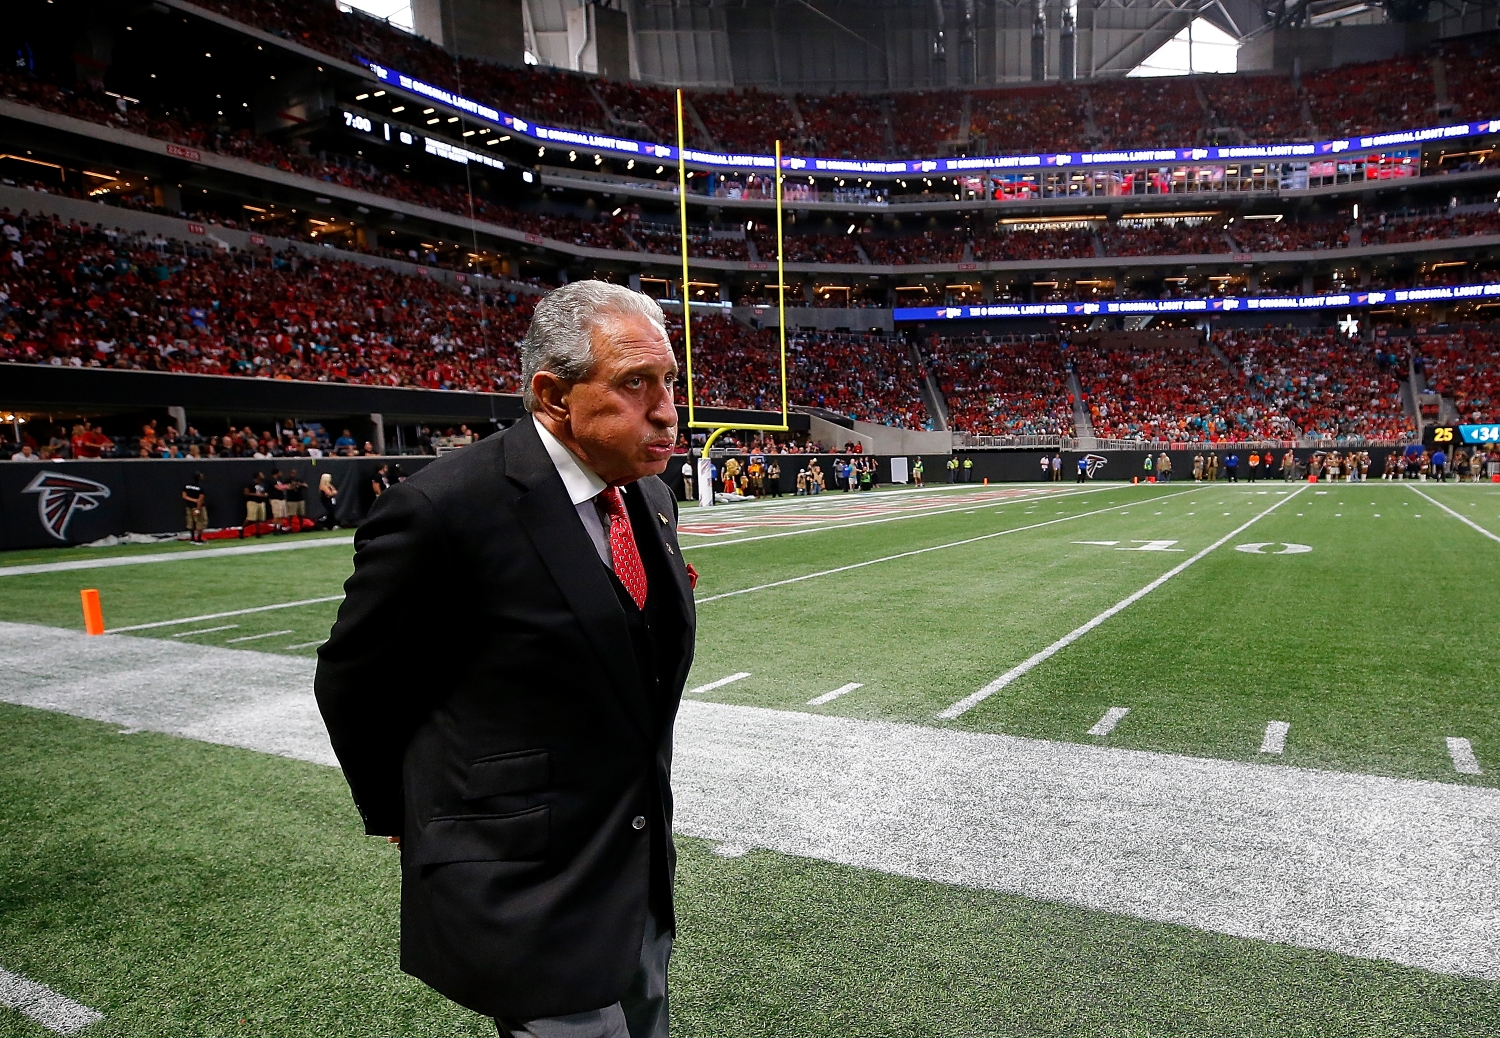 Atlanta Falcons owner Arthur Blank walks the sidelines during a game against the Miami Dolphins from the 2017 NFL season.